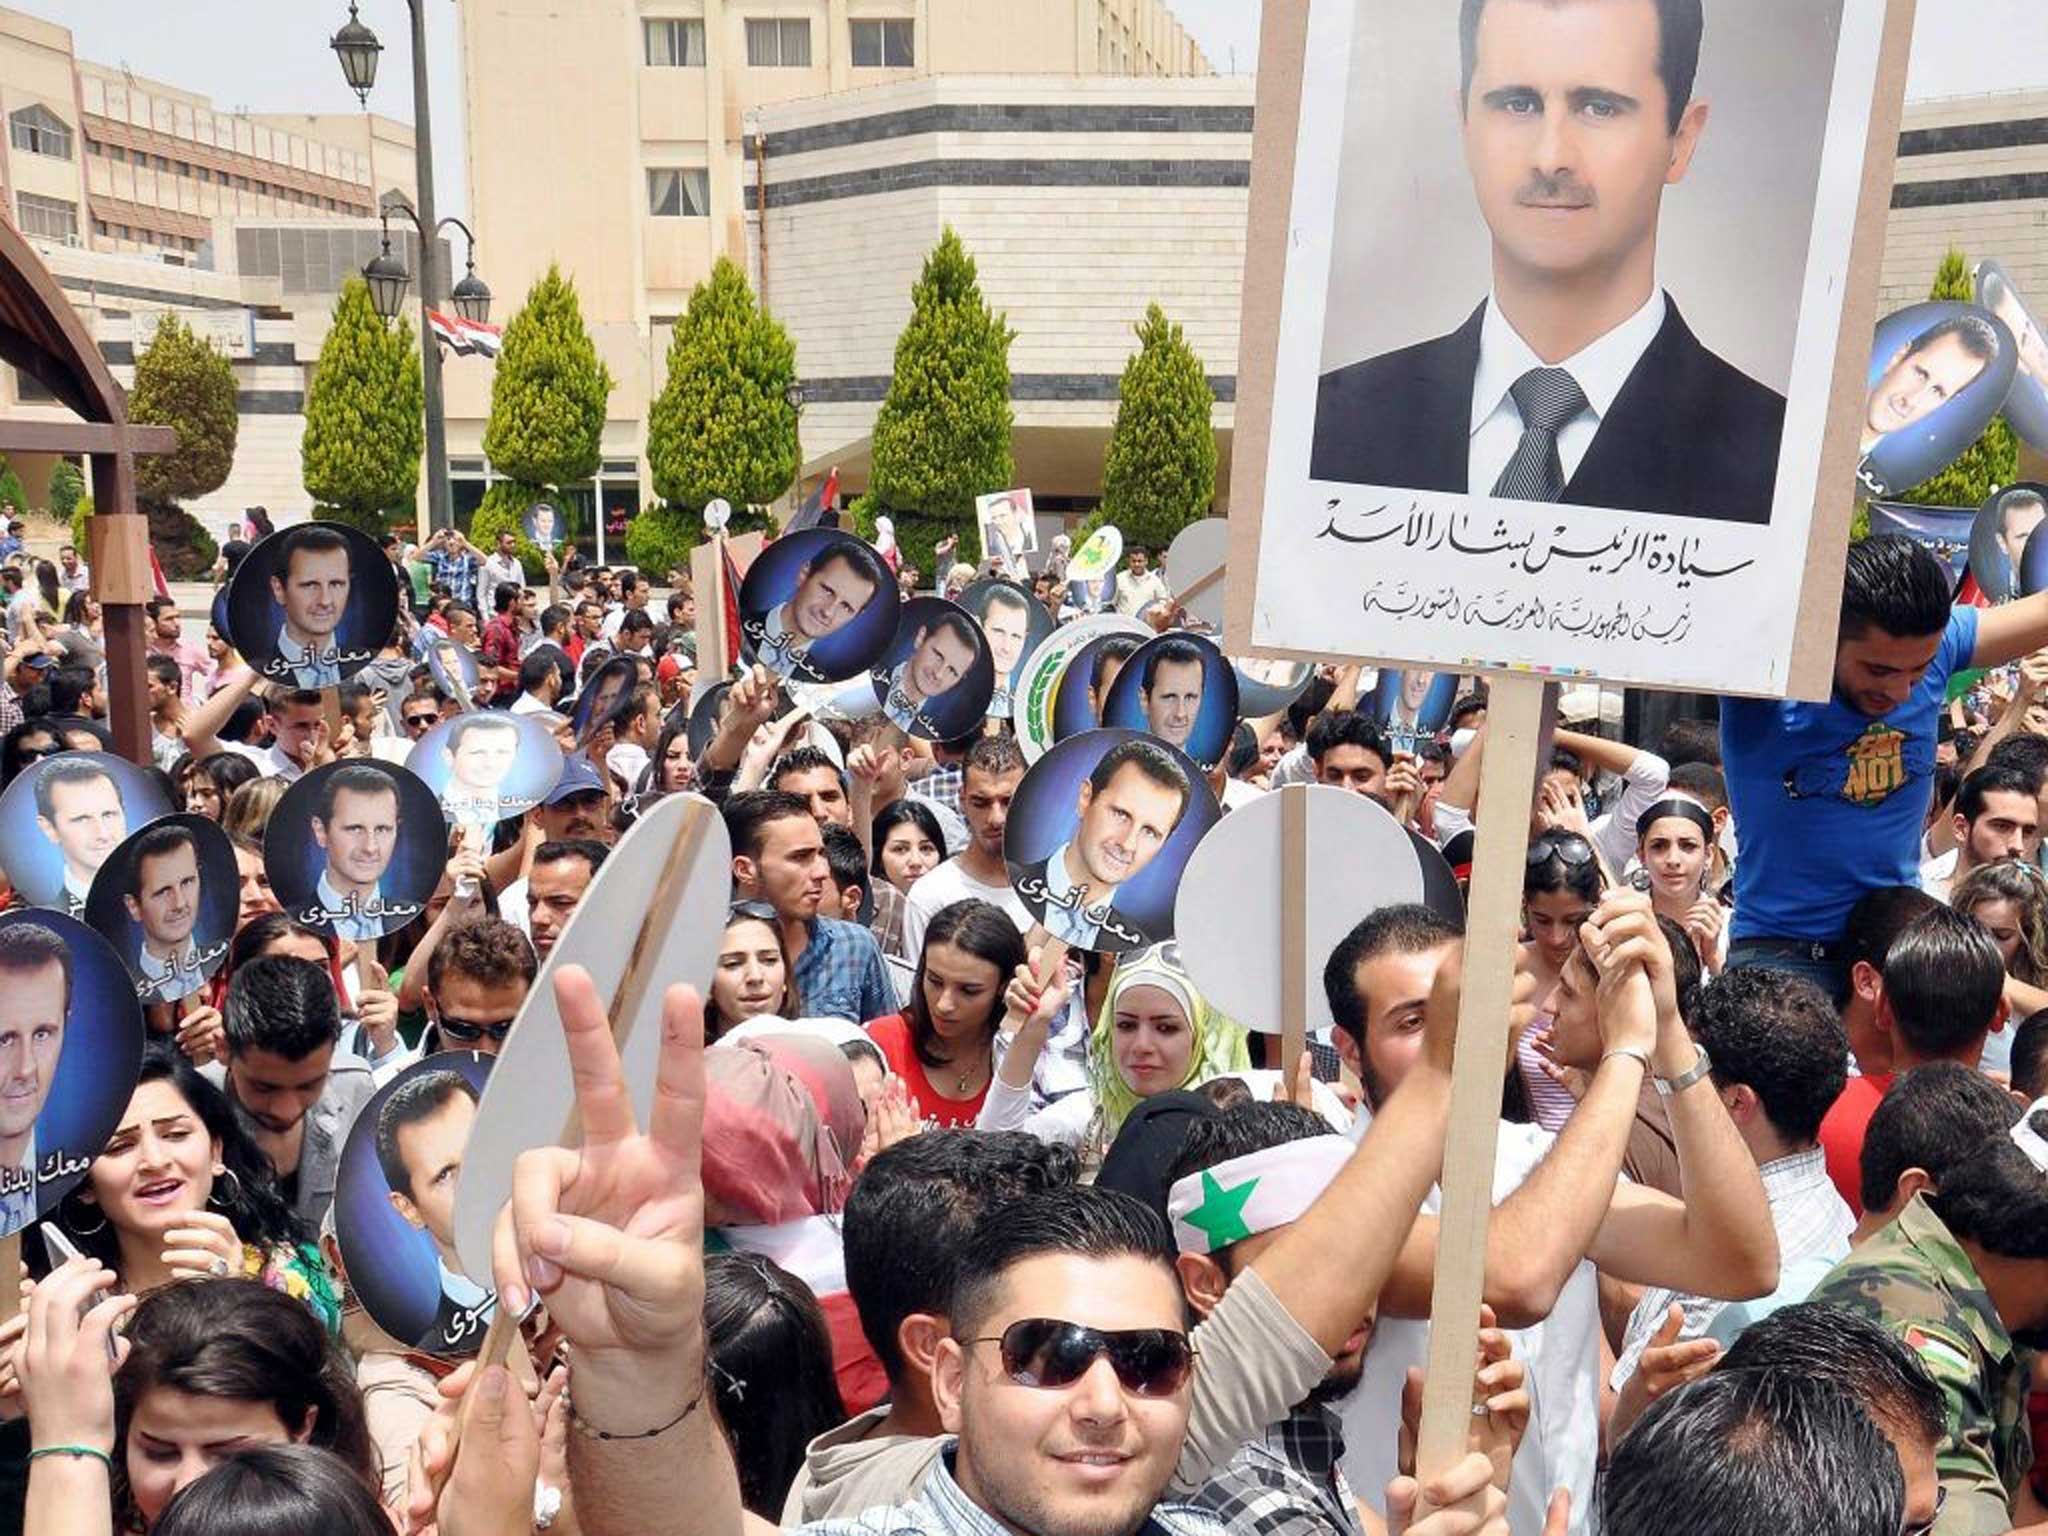 Zero tolerance: Bashar al-Assad supporters turn out to mark his election to a third seven-year term as president